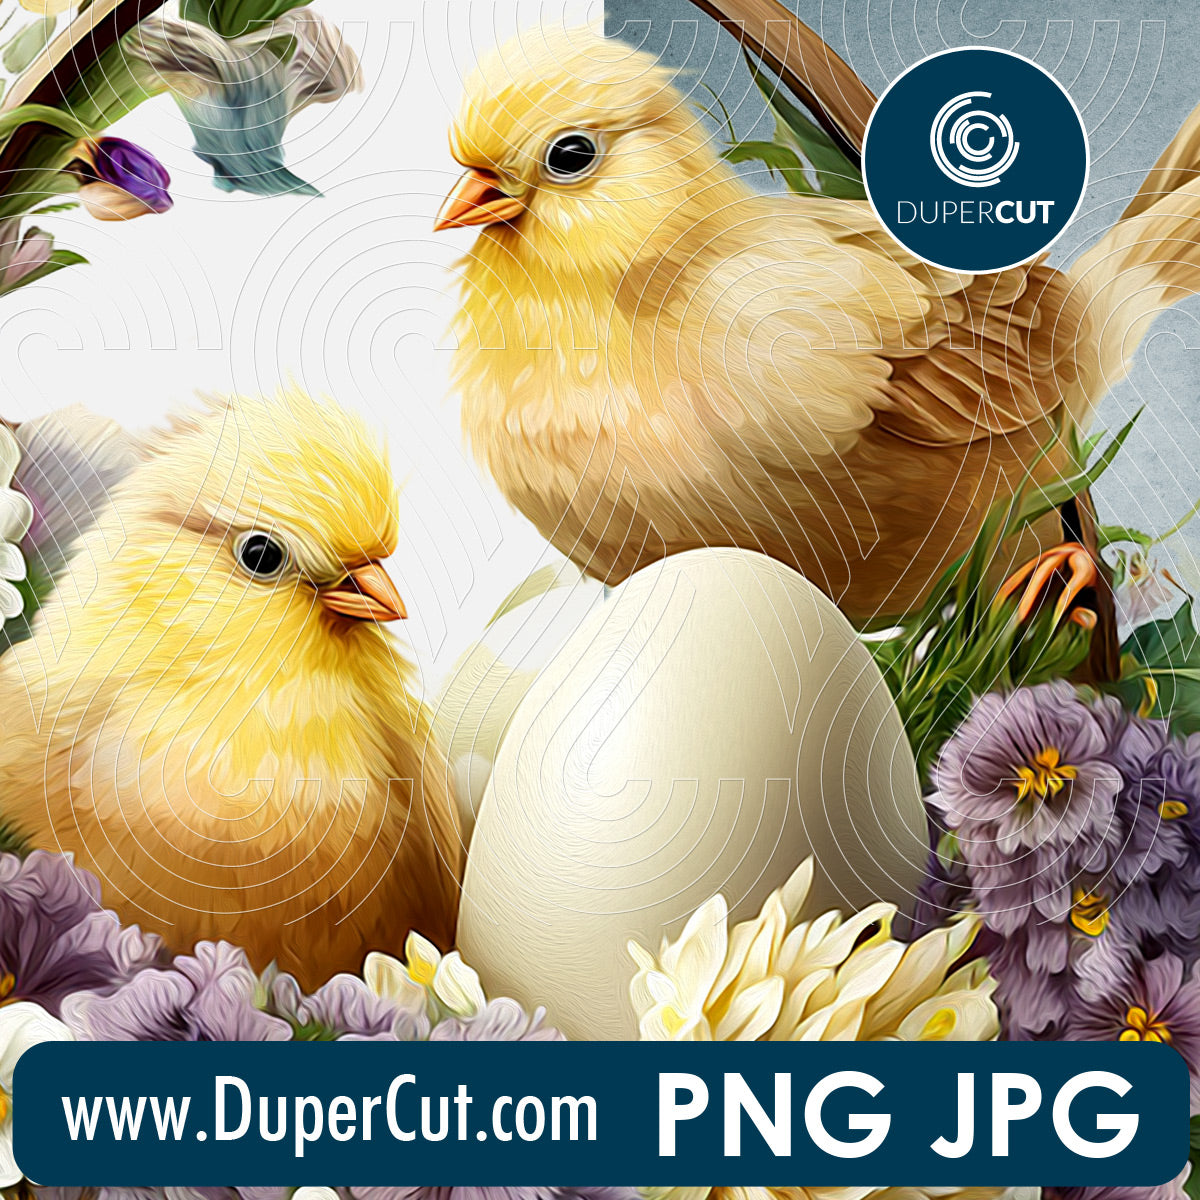 Floral Easter basket - full color files for sublimation, print on demand, high resolution PNG JPG template transparent background by www.dupercut.com